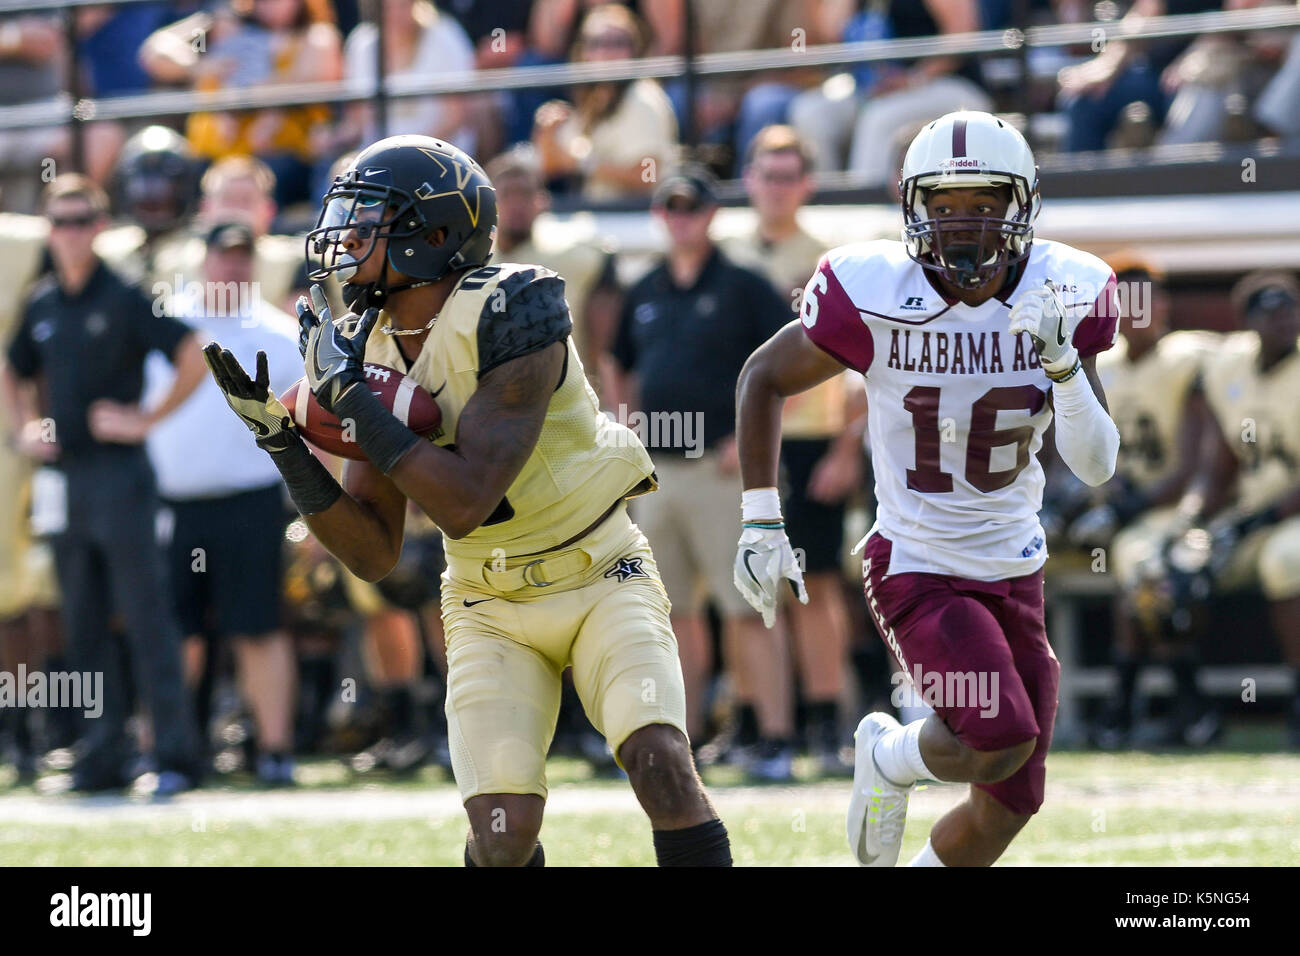 Nashville, TN, USA. 2nd Sep, 2017. Vanderbilt Commodores wide receiver Kalija Lipscomb (16) catchin a pass over Alabama A&M defensive back Tuwile Wilson #16 during a game between the Alabama A&M Bulldogs and the Vanderbilt Commodores at Vanderbilt Stadium in Nashville, TN. Thomas McEwen/CSM/Alamy Live News Stock Photo